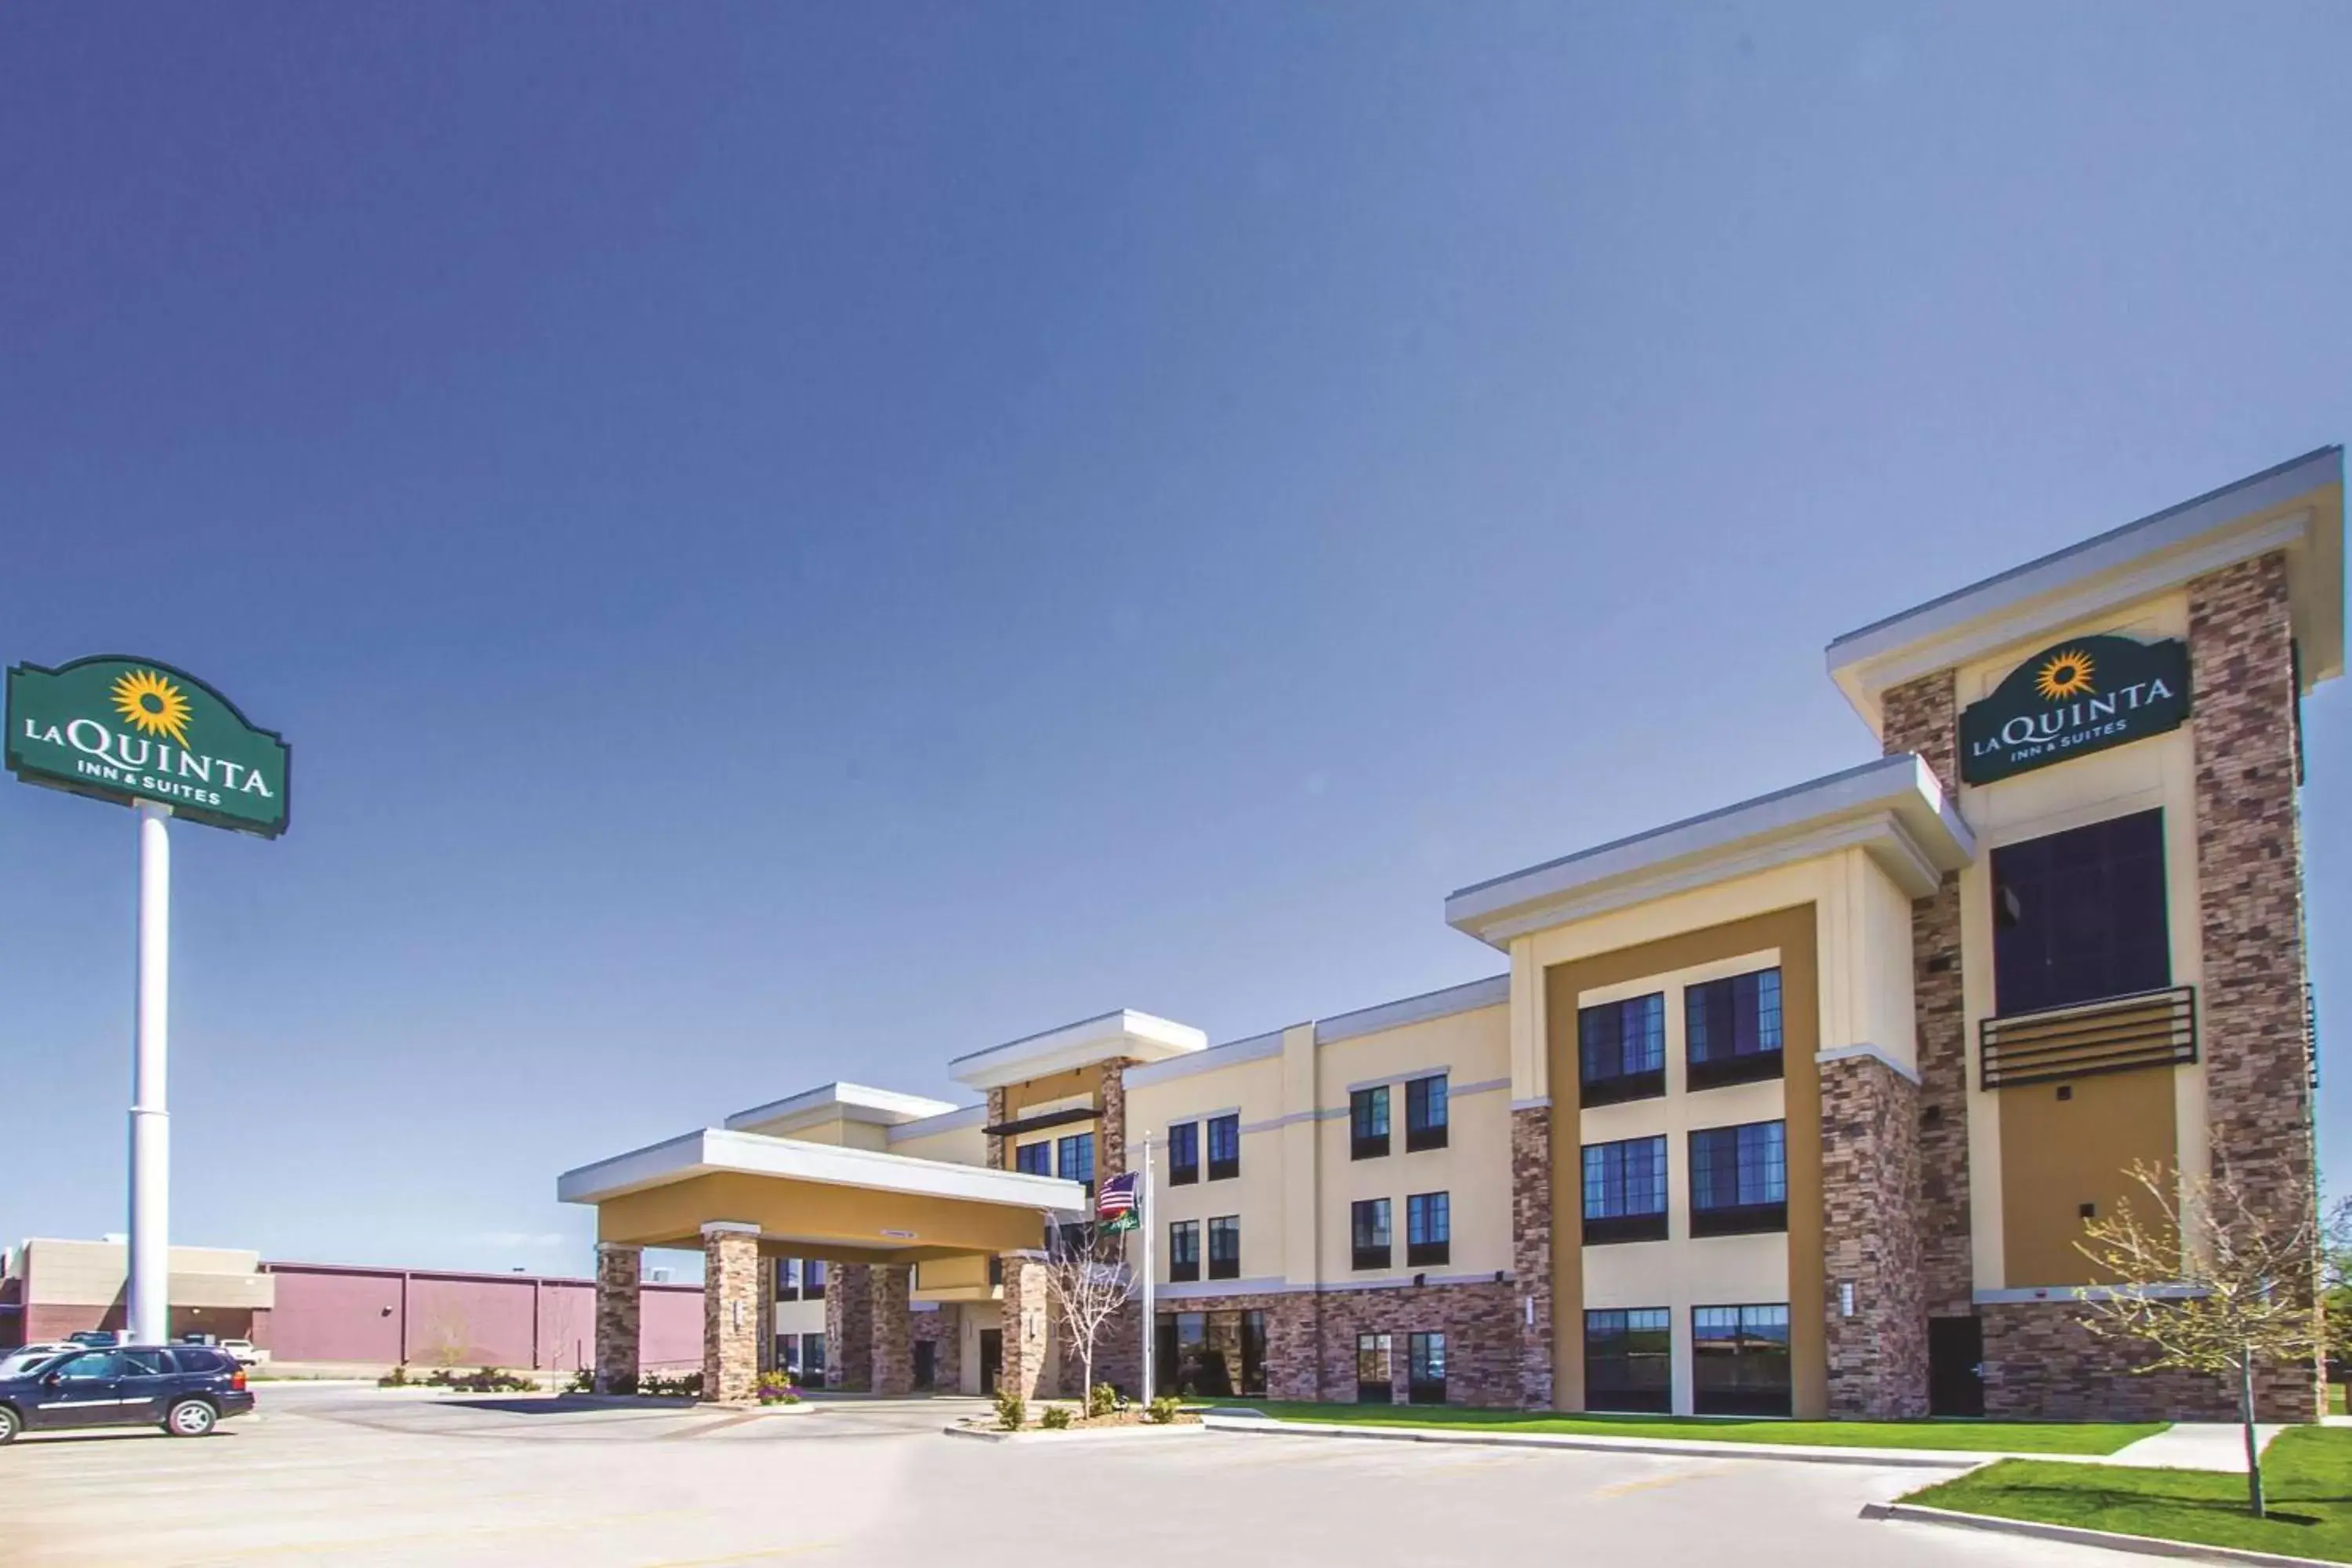 Property building in La Quinta Inn & Suites by Wyndham Pampa